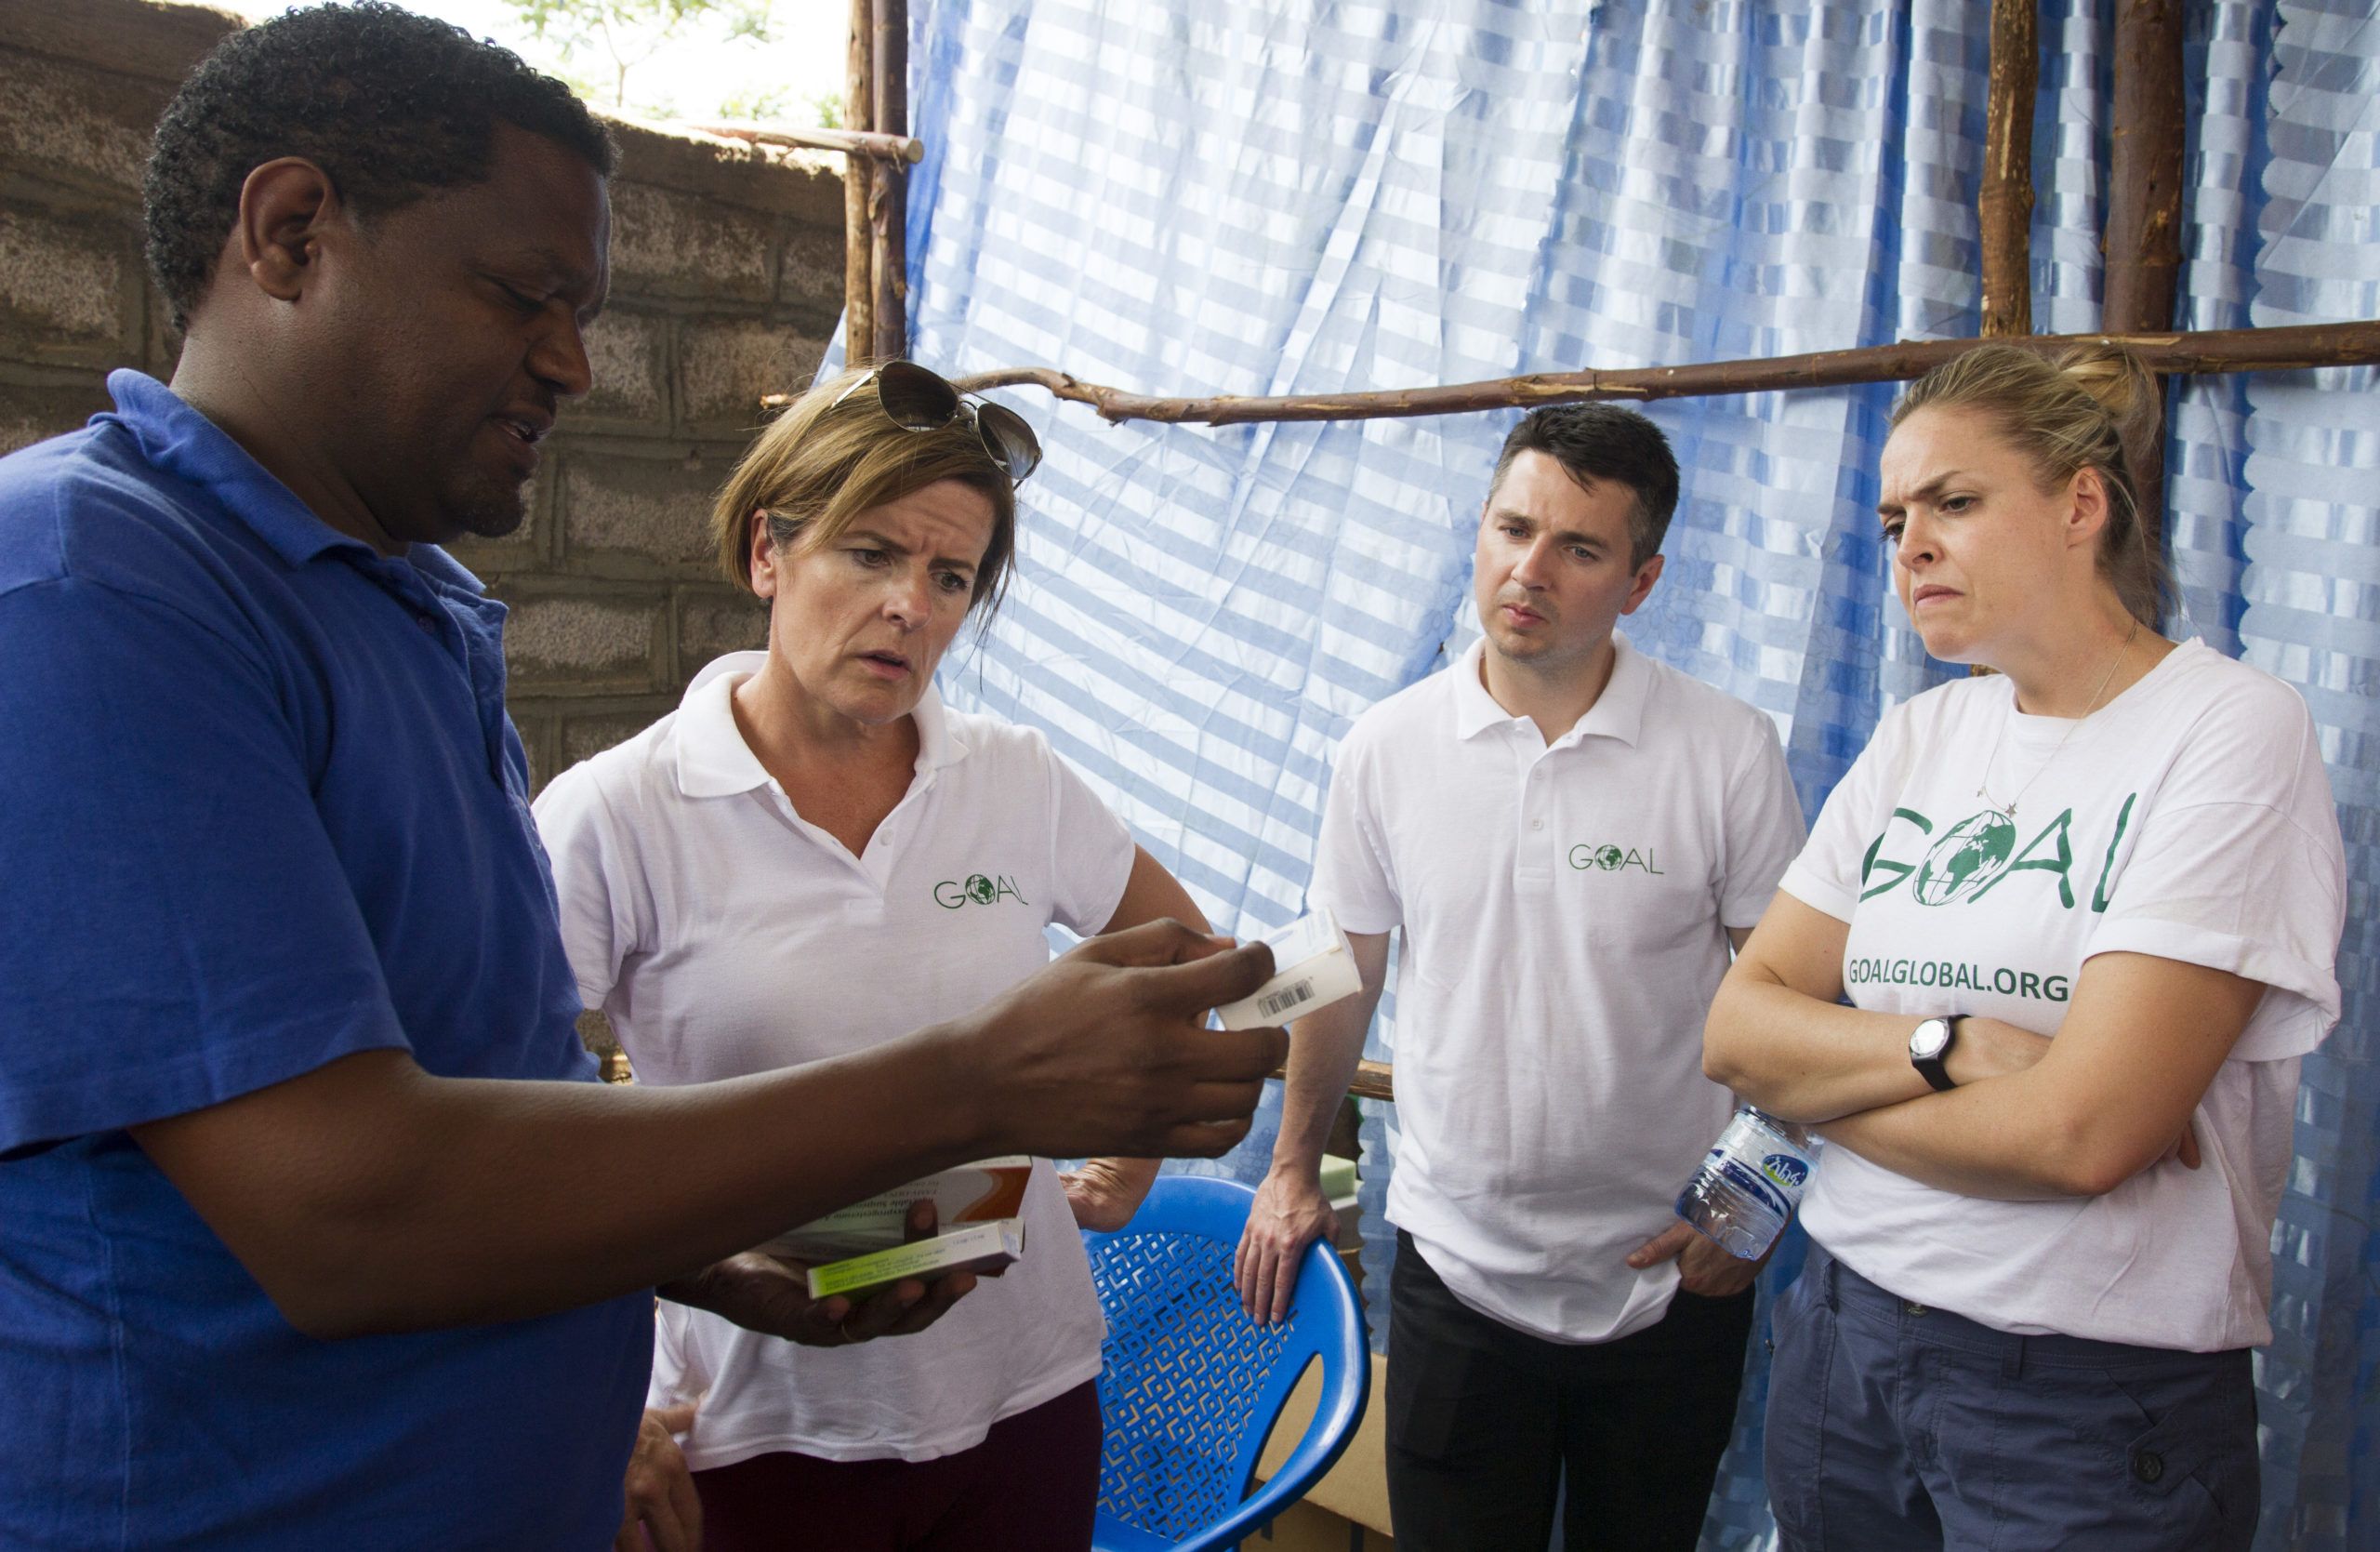 02_Adrienne Gormley Director of Dropbox Ireland on a visit to GOAL Ethiopia mobile health centre for internally displaced people at Dilla on May 2019_photo by Anteneh Tadele.